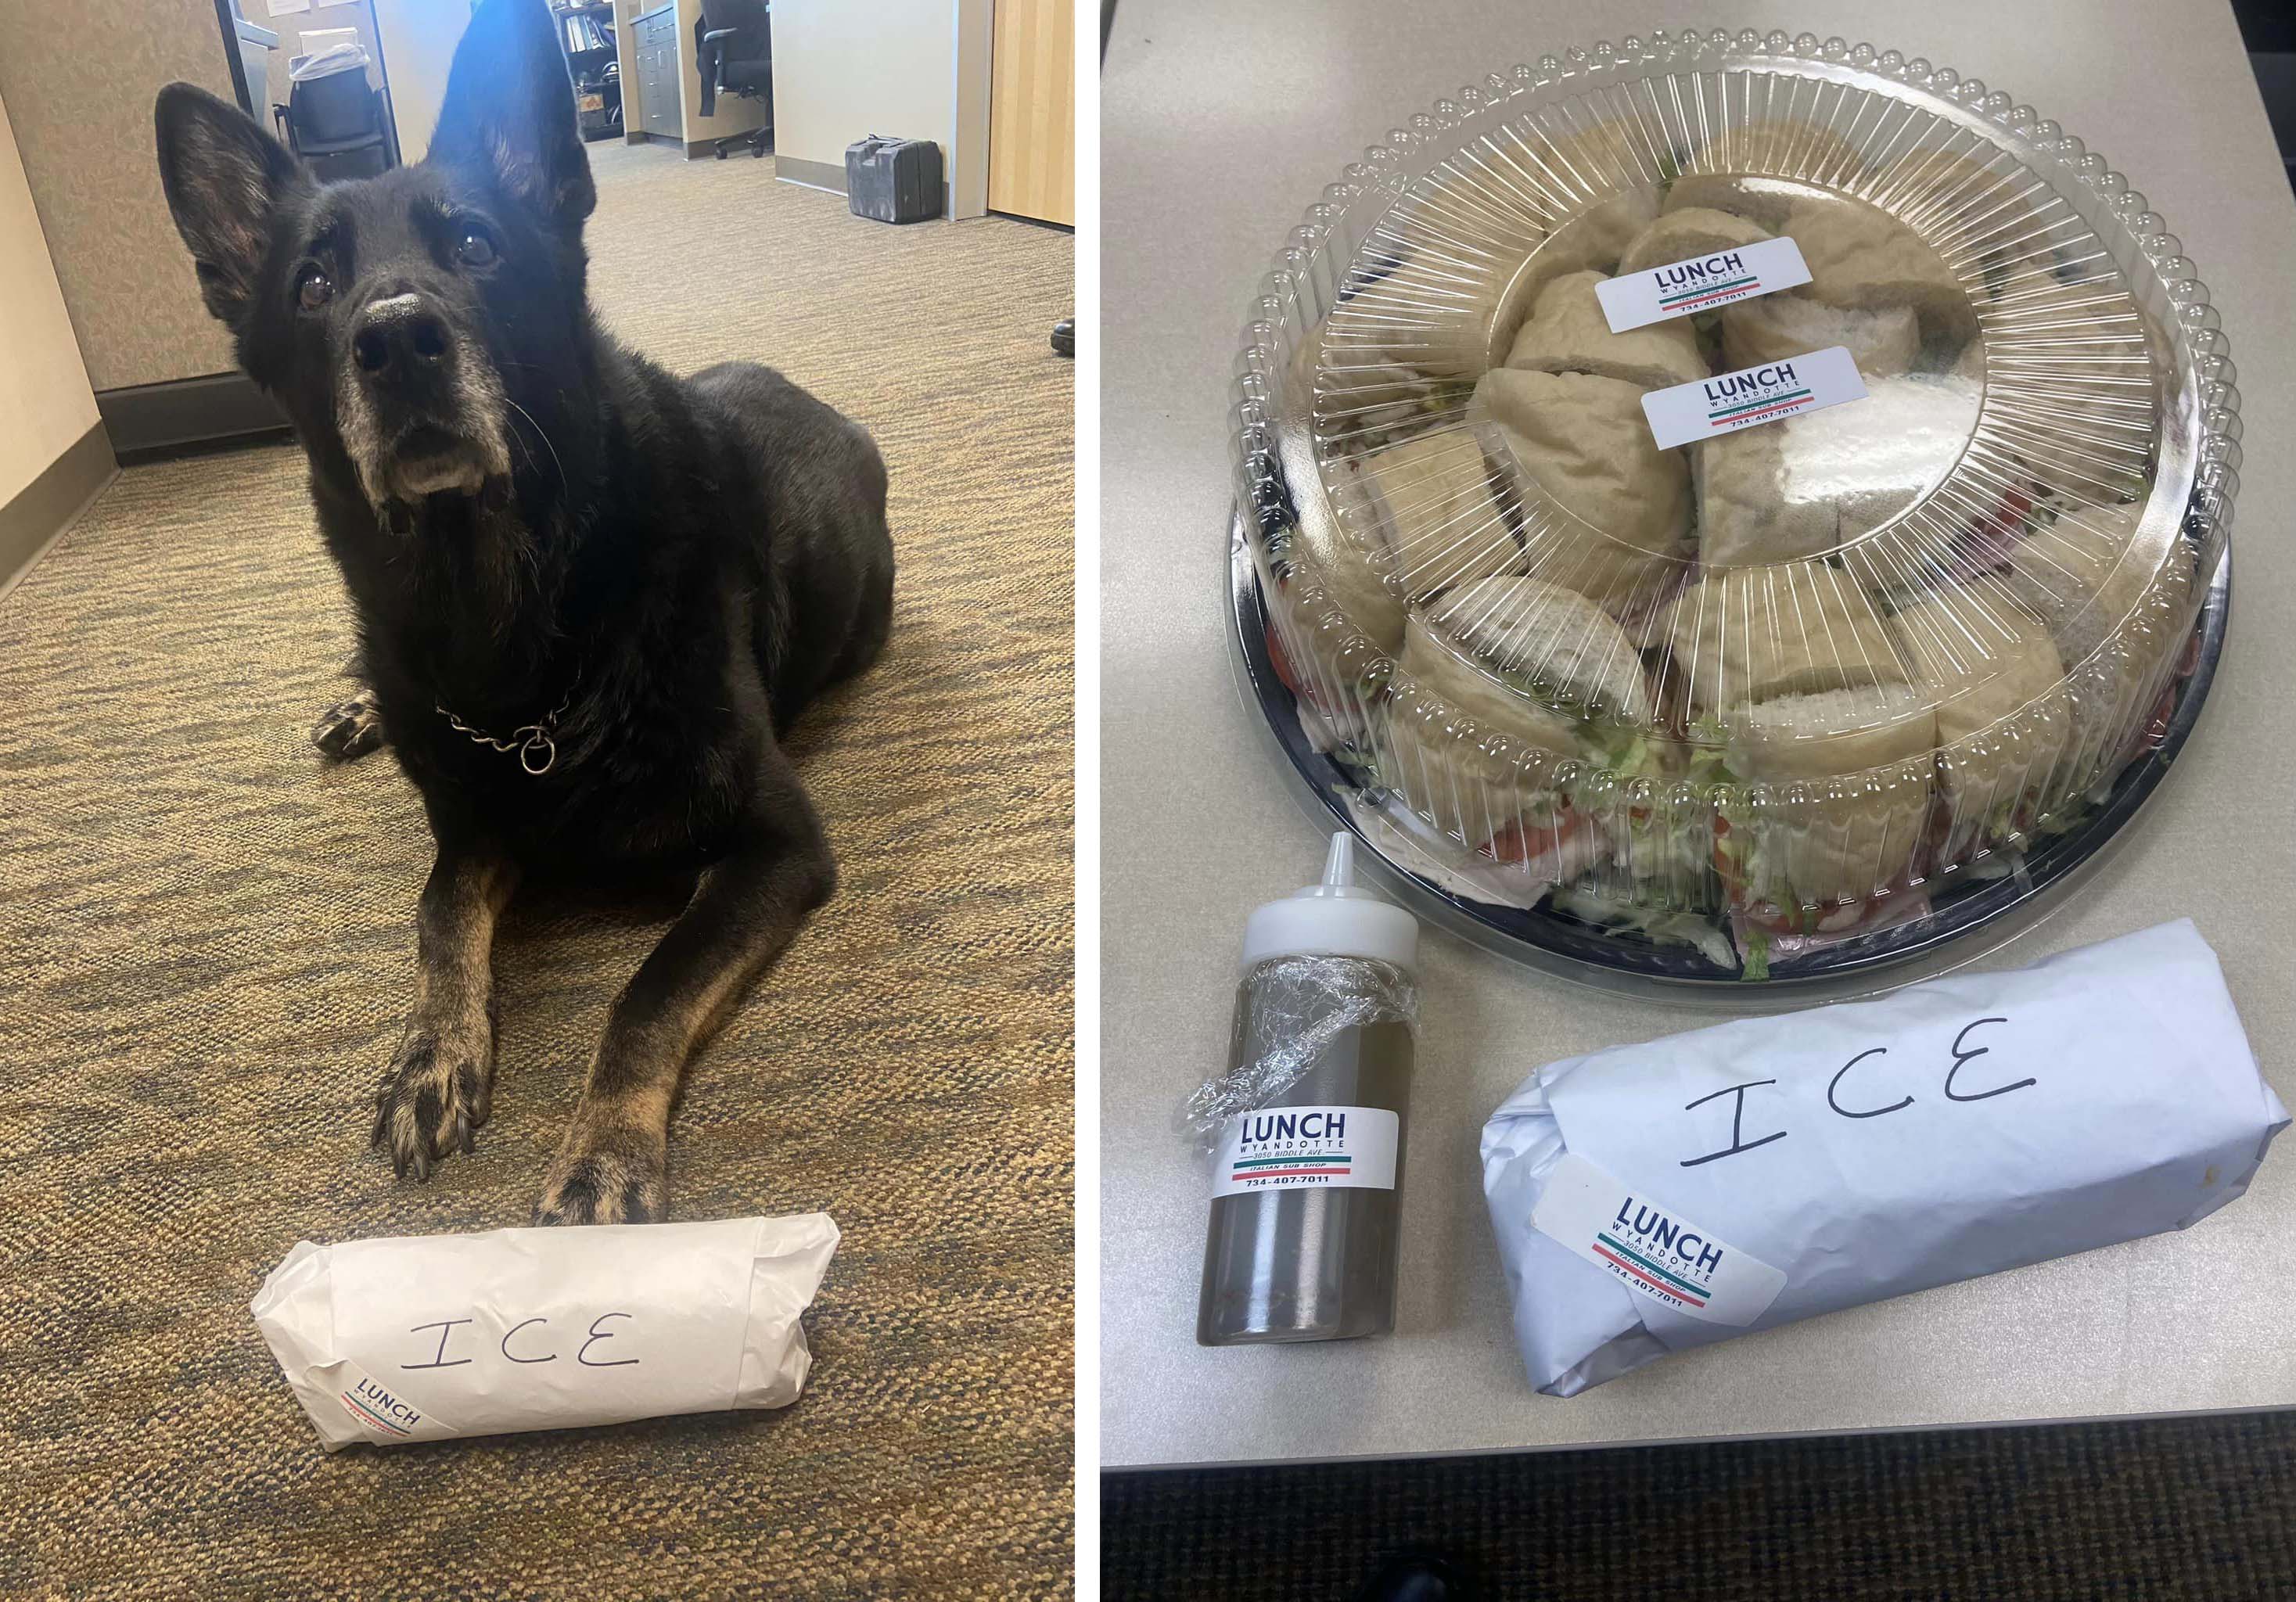 Police K9 Accused of ‘Stealing’ Officer’s Lunch ‘Invokes Fifth Amendment’ Right to Remain Silent